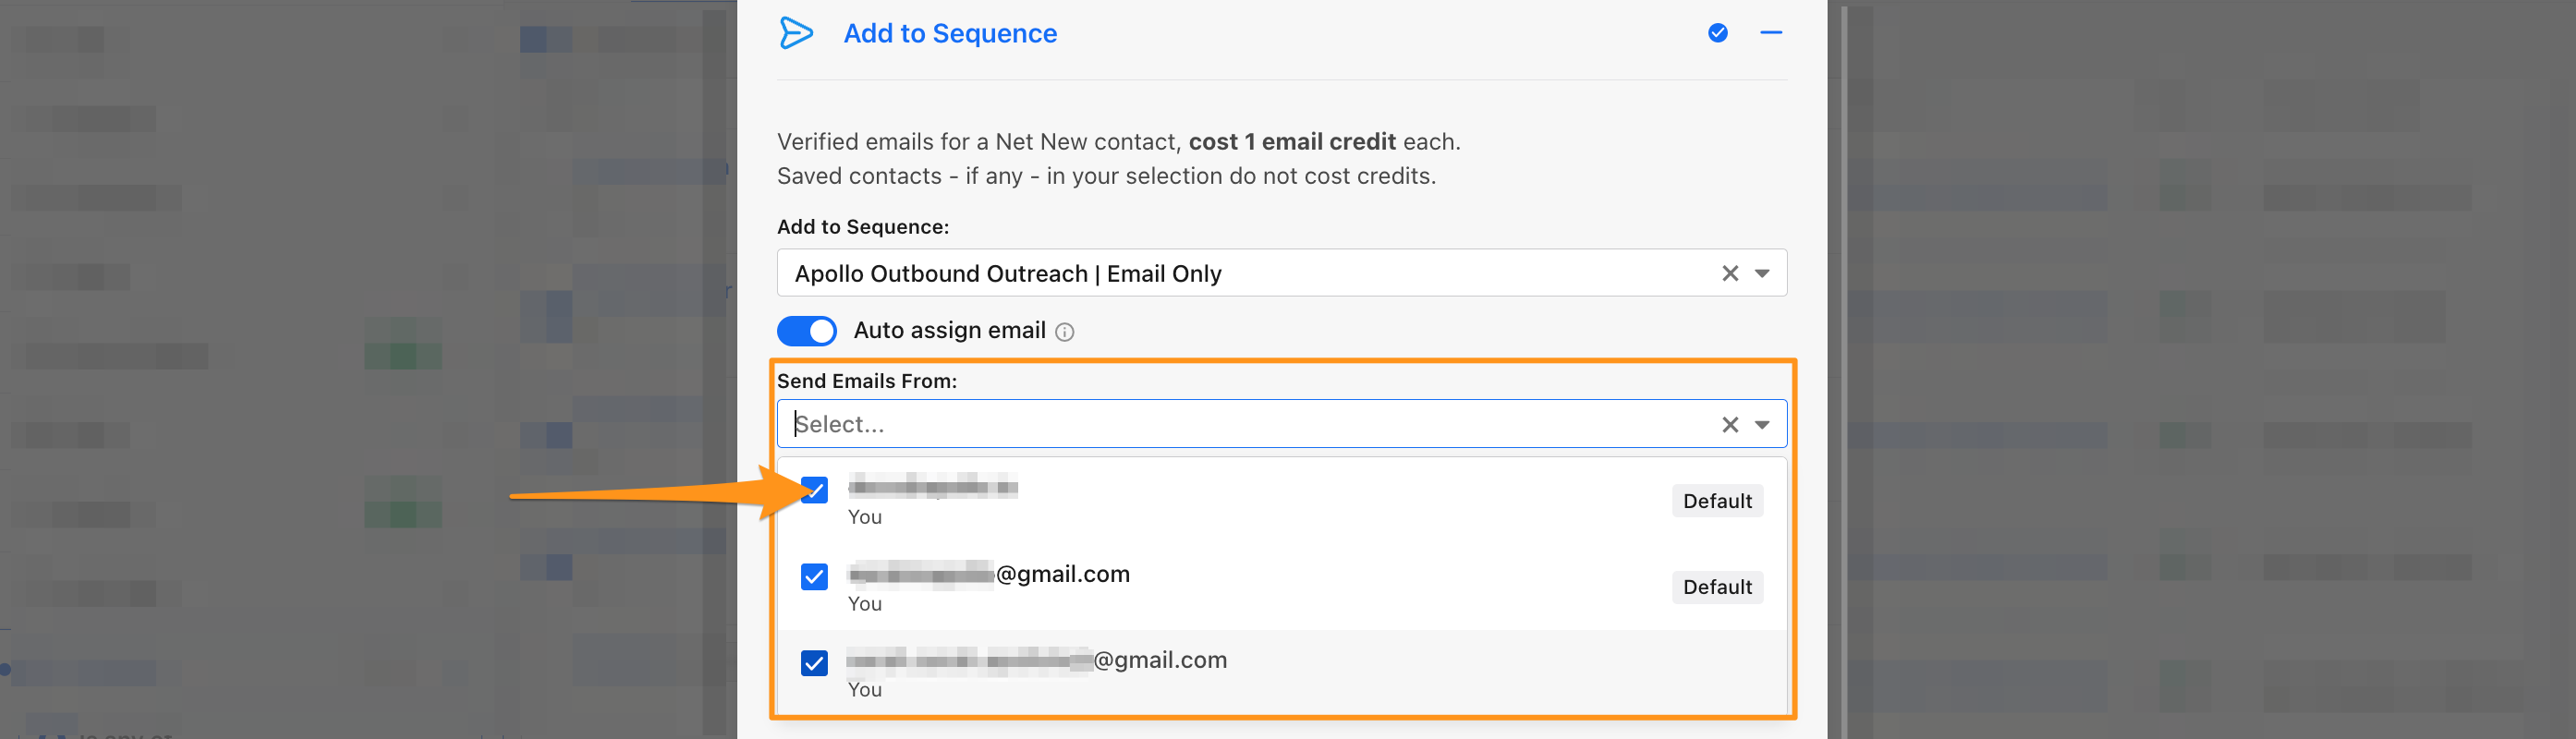 Mailbox checkboxes in send emails from dropdown